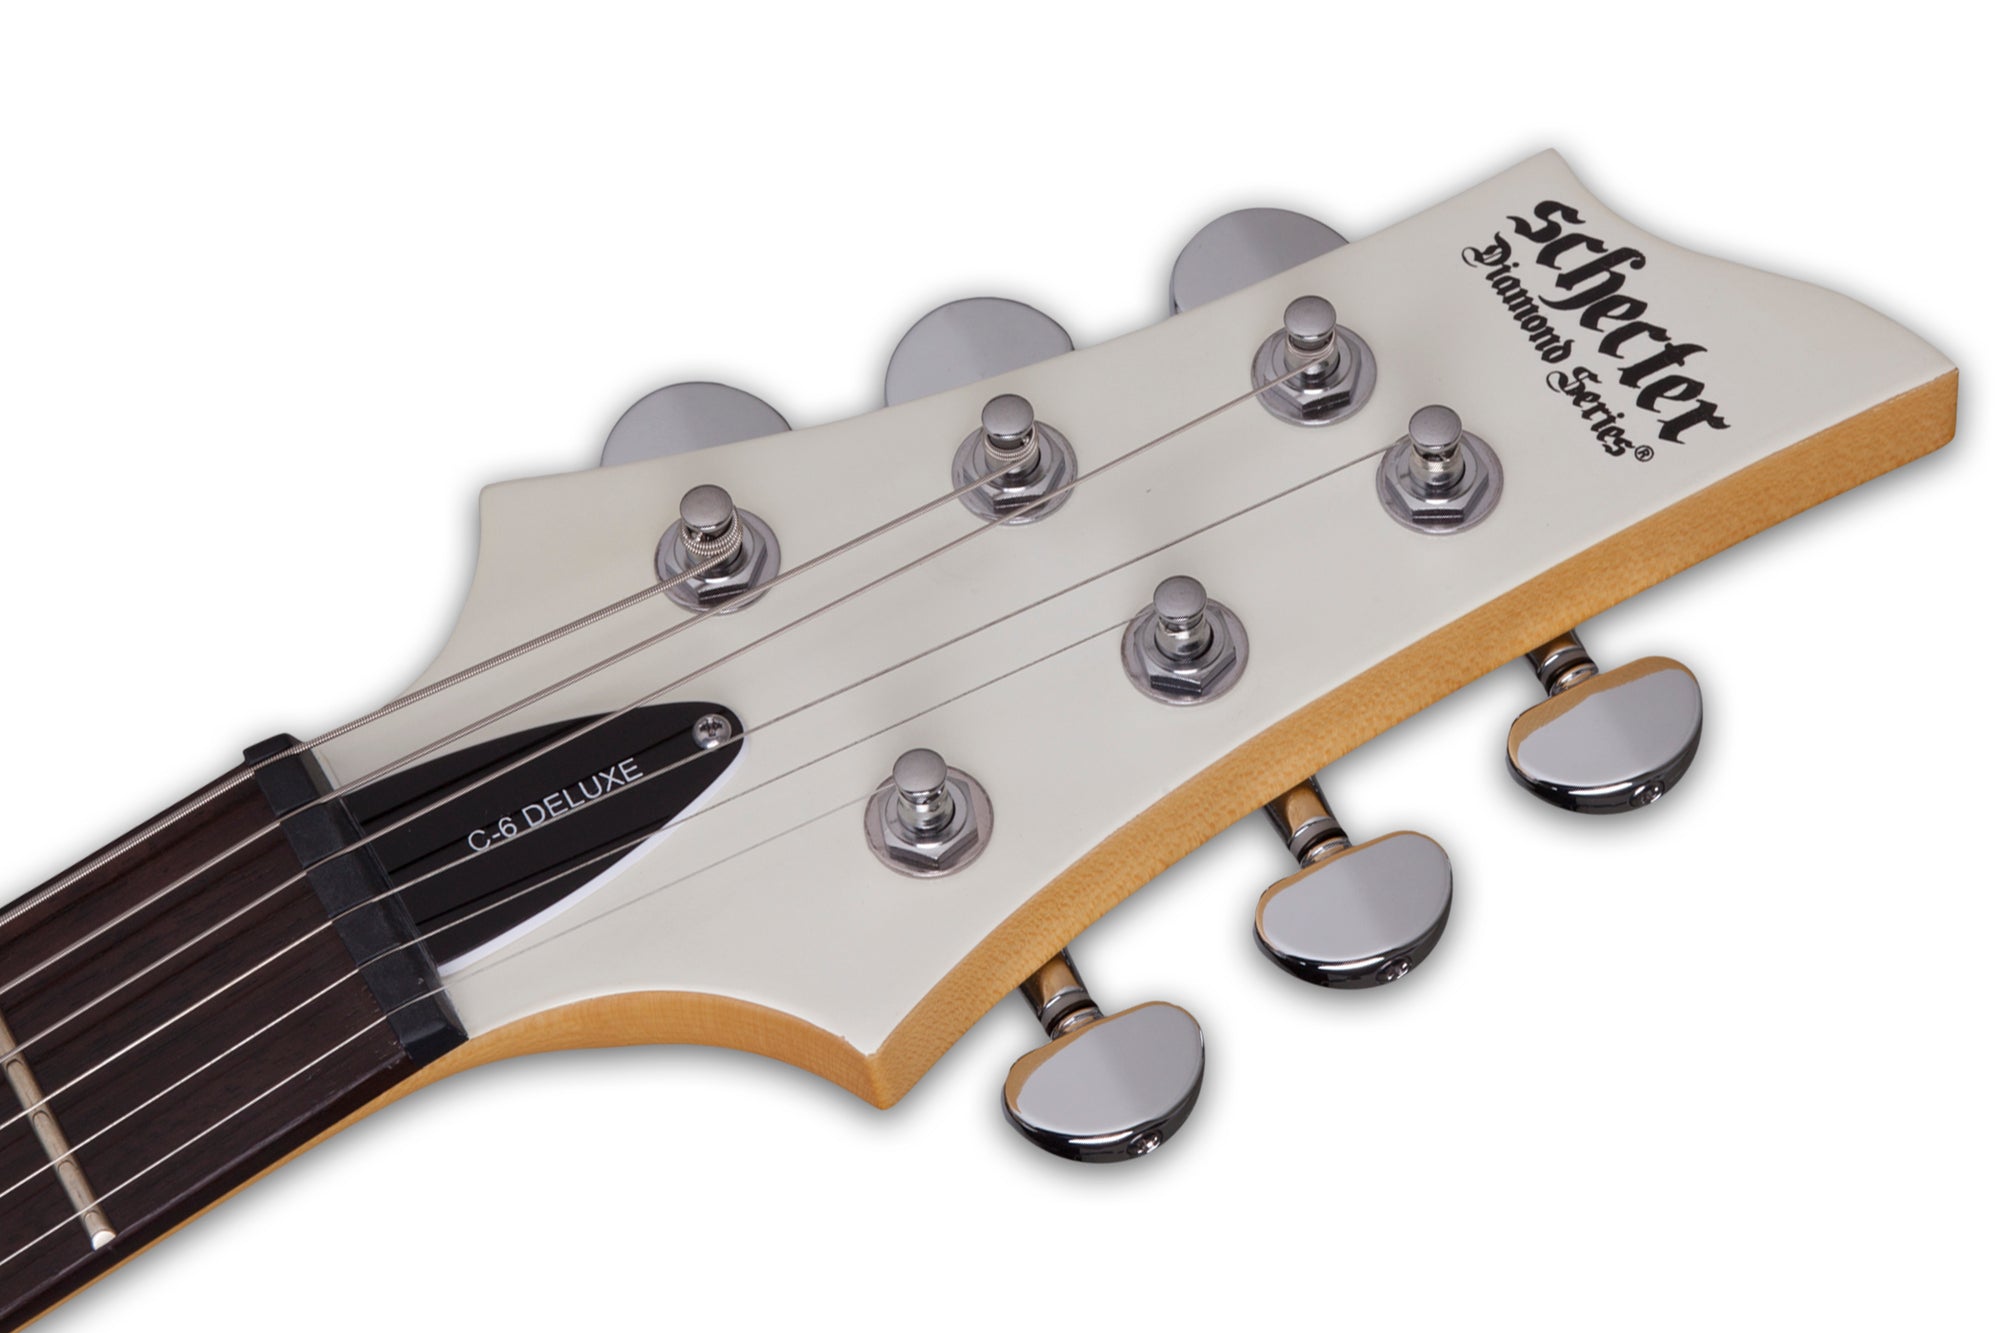 Schecter C-6 Deluxe in Satin White SWHT SKU 432 - The Guitar World